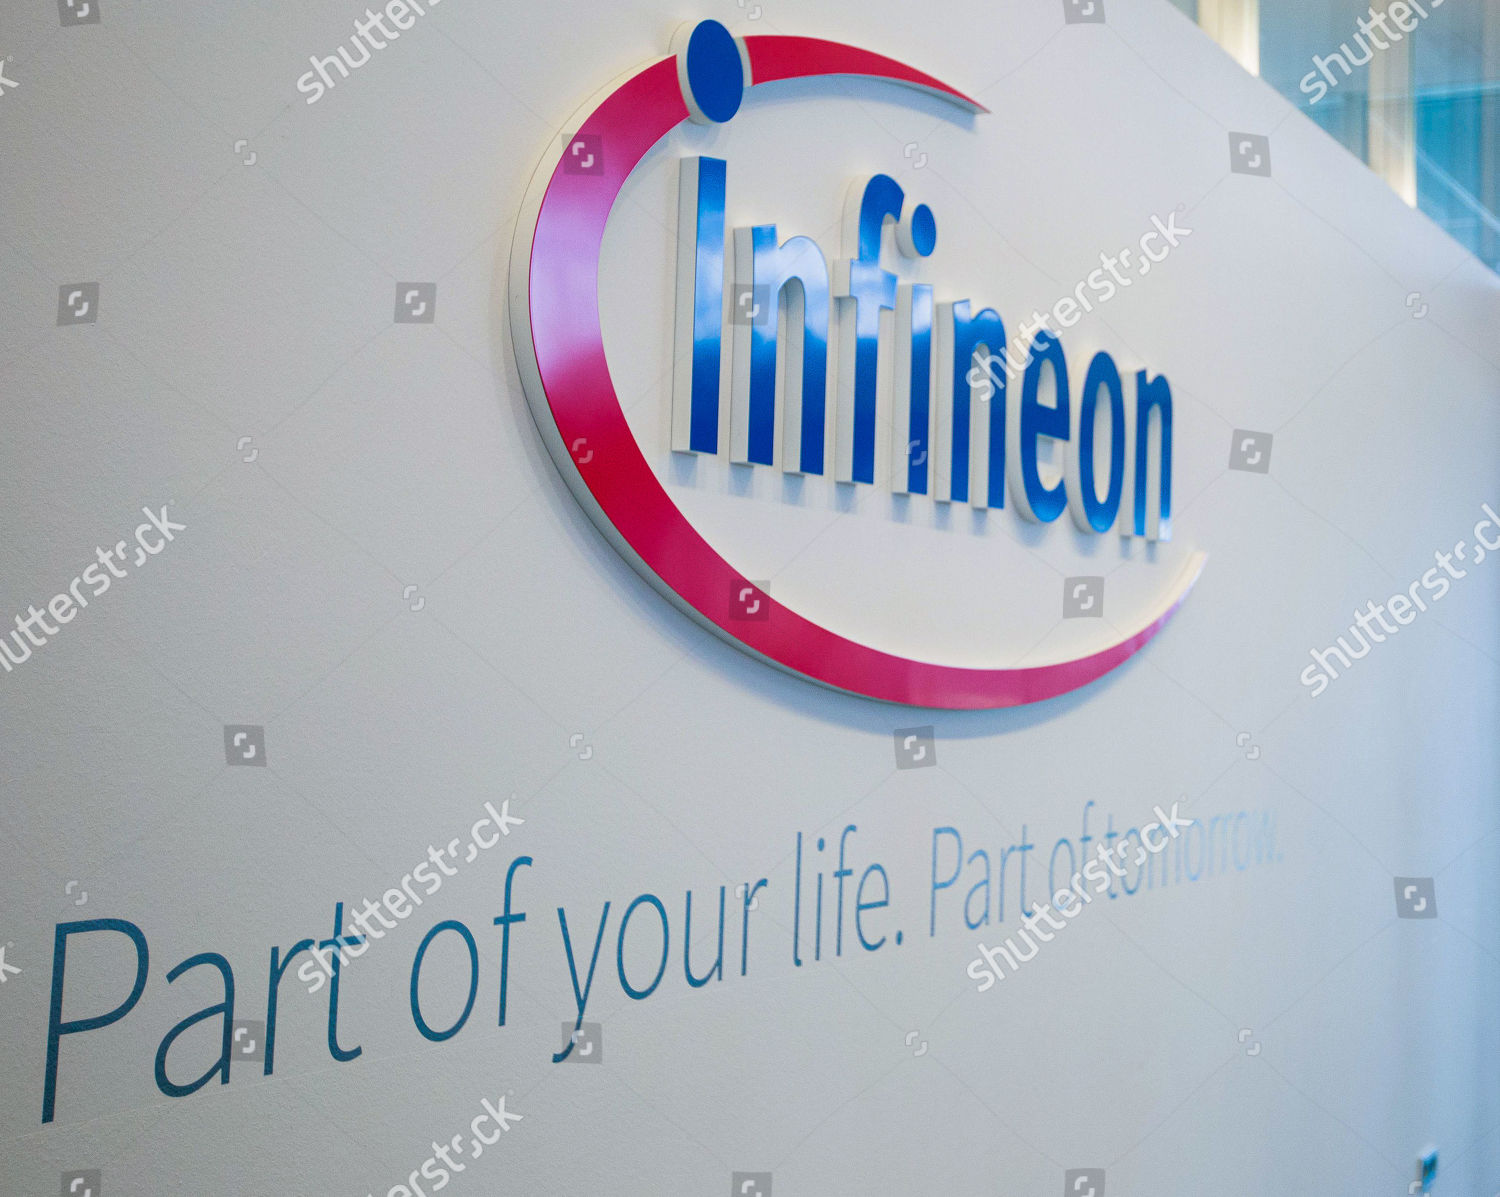 Logo Infineon Annual Press Conference Infineon Technologies Editorial Stock Photo Stock Image Shutterstock